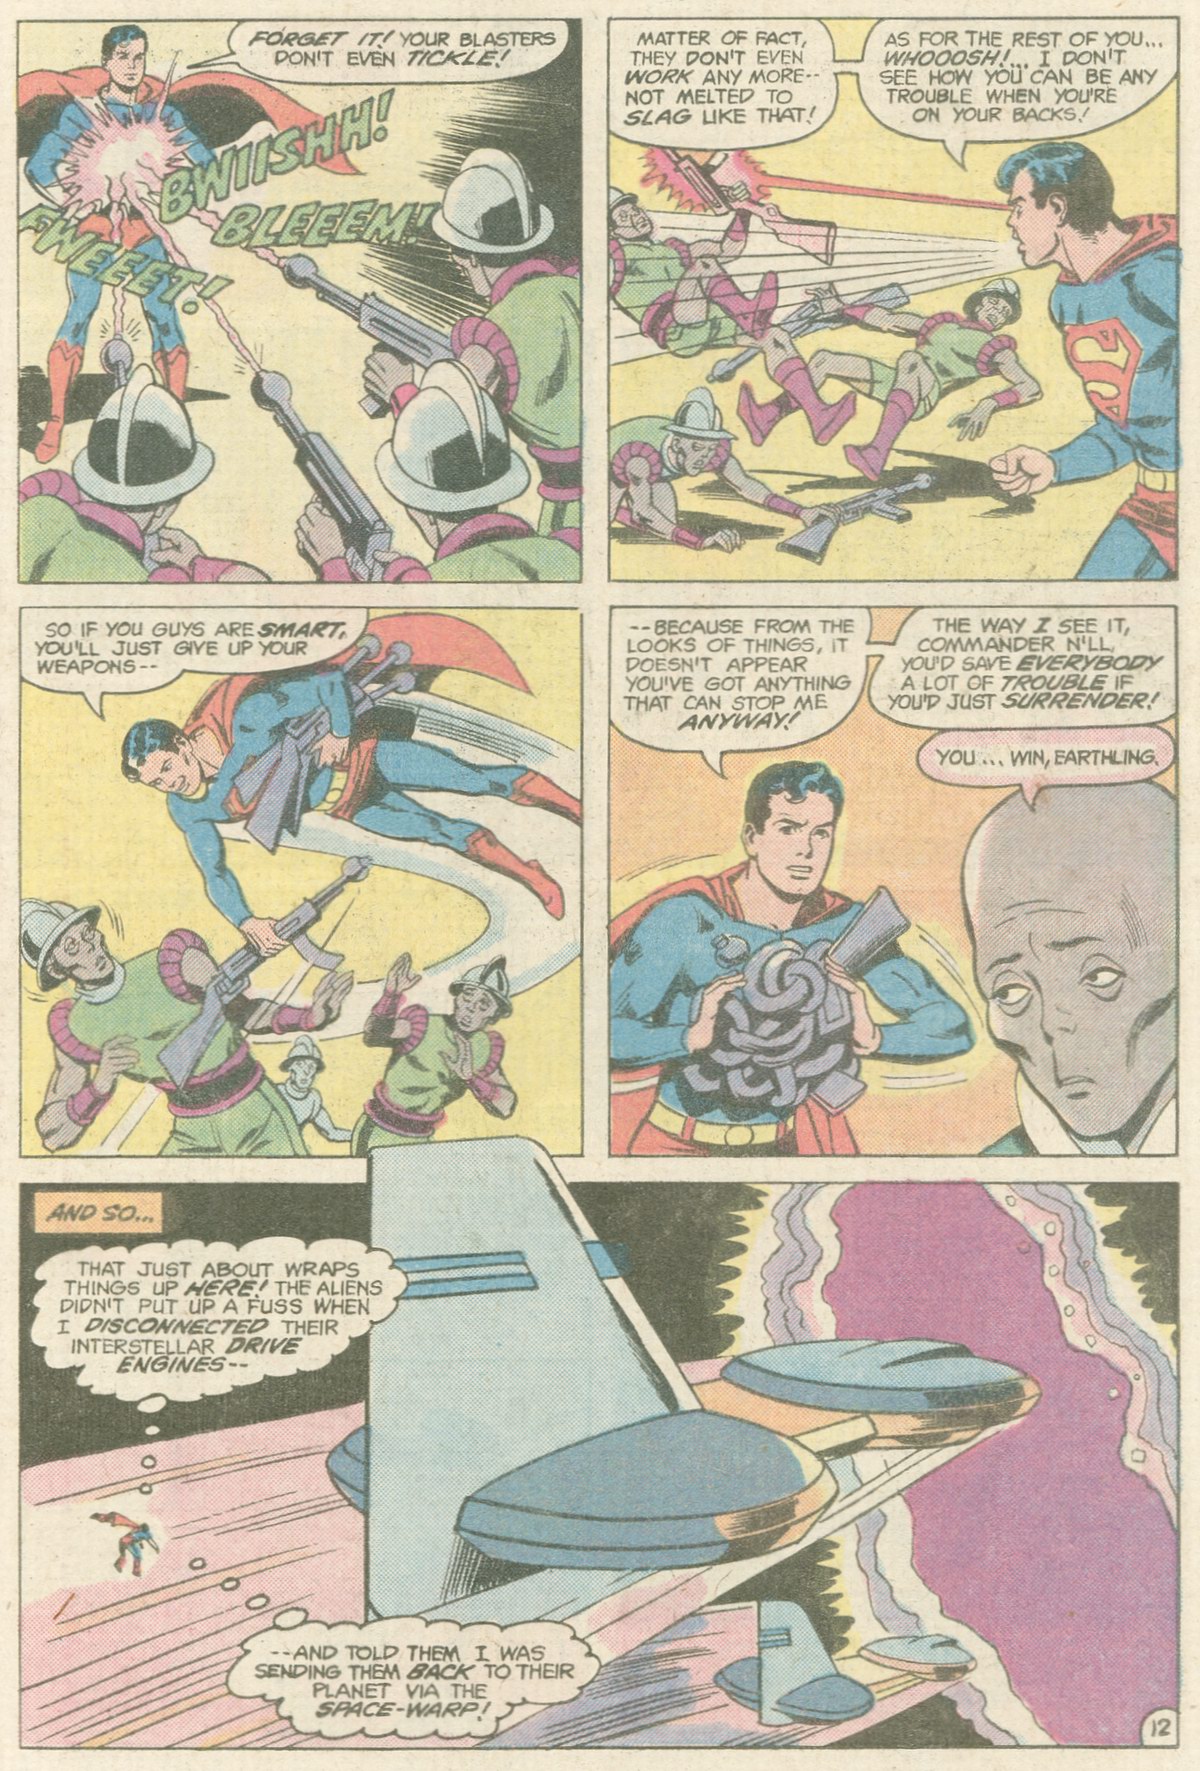 The New Adventures of Superboy 41 Page 12